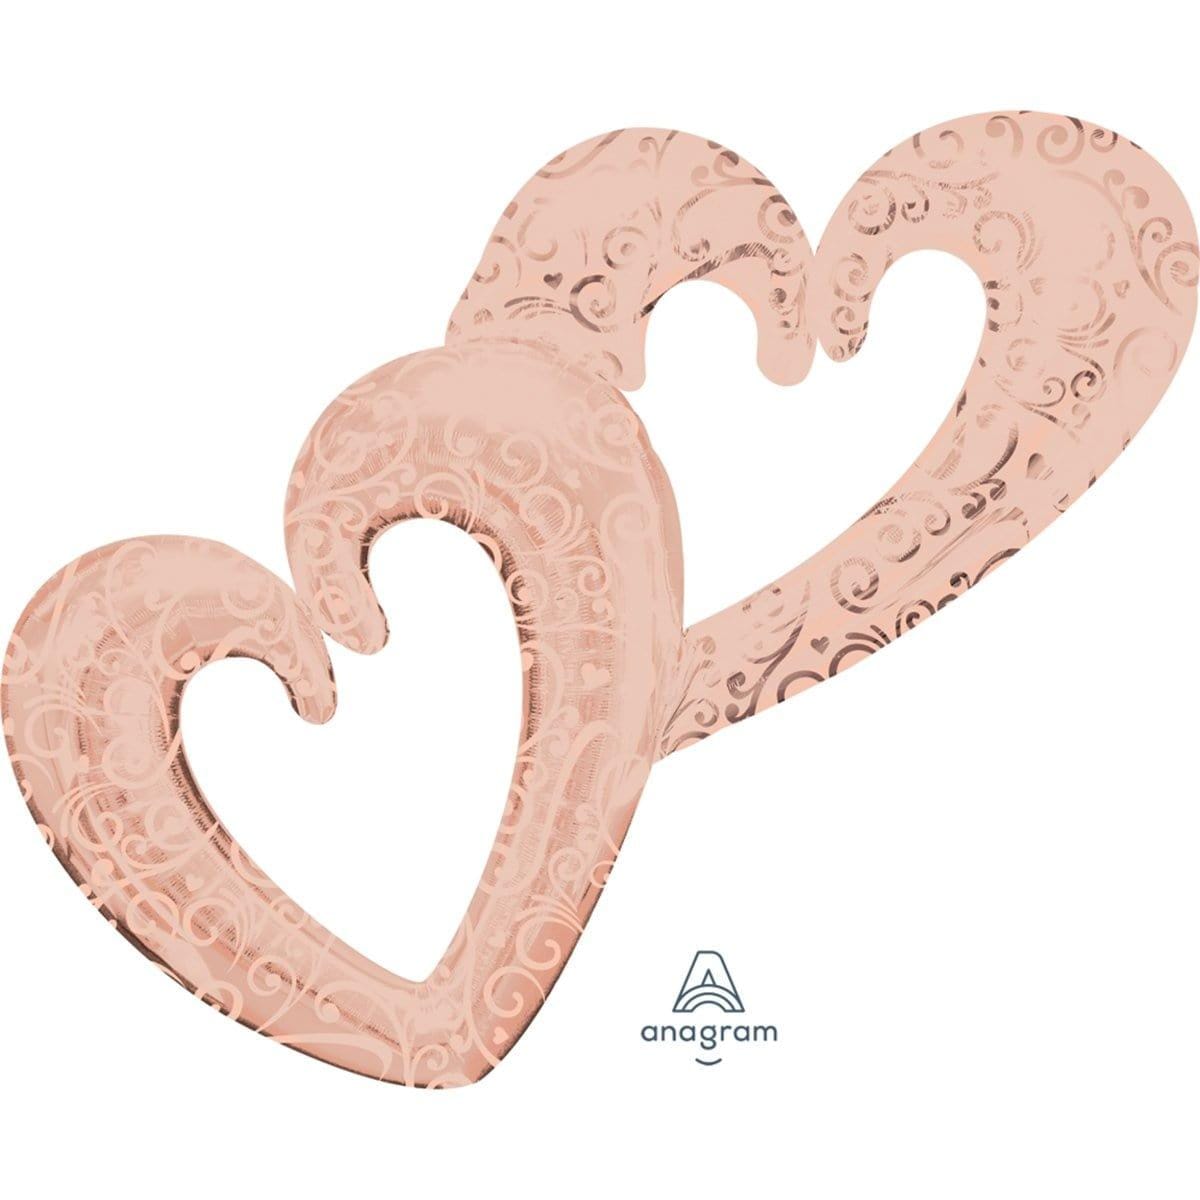 Buy Balloons Rose Gold Interlocking Hearts Supershape Balloon sold at Party Expert